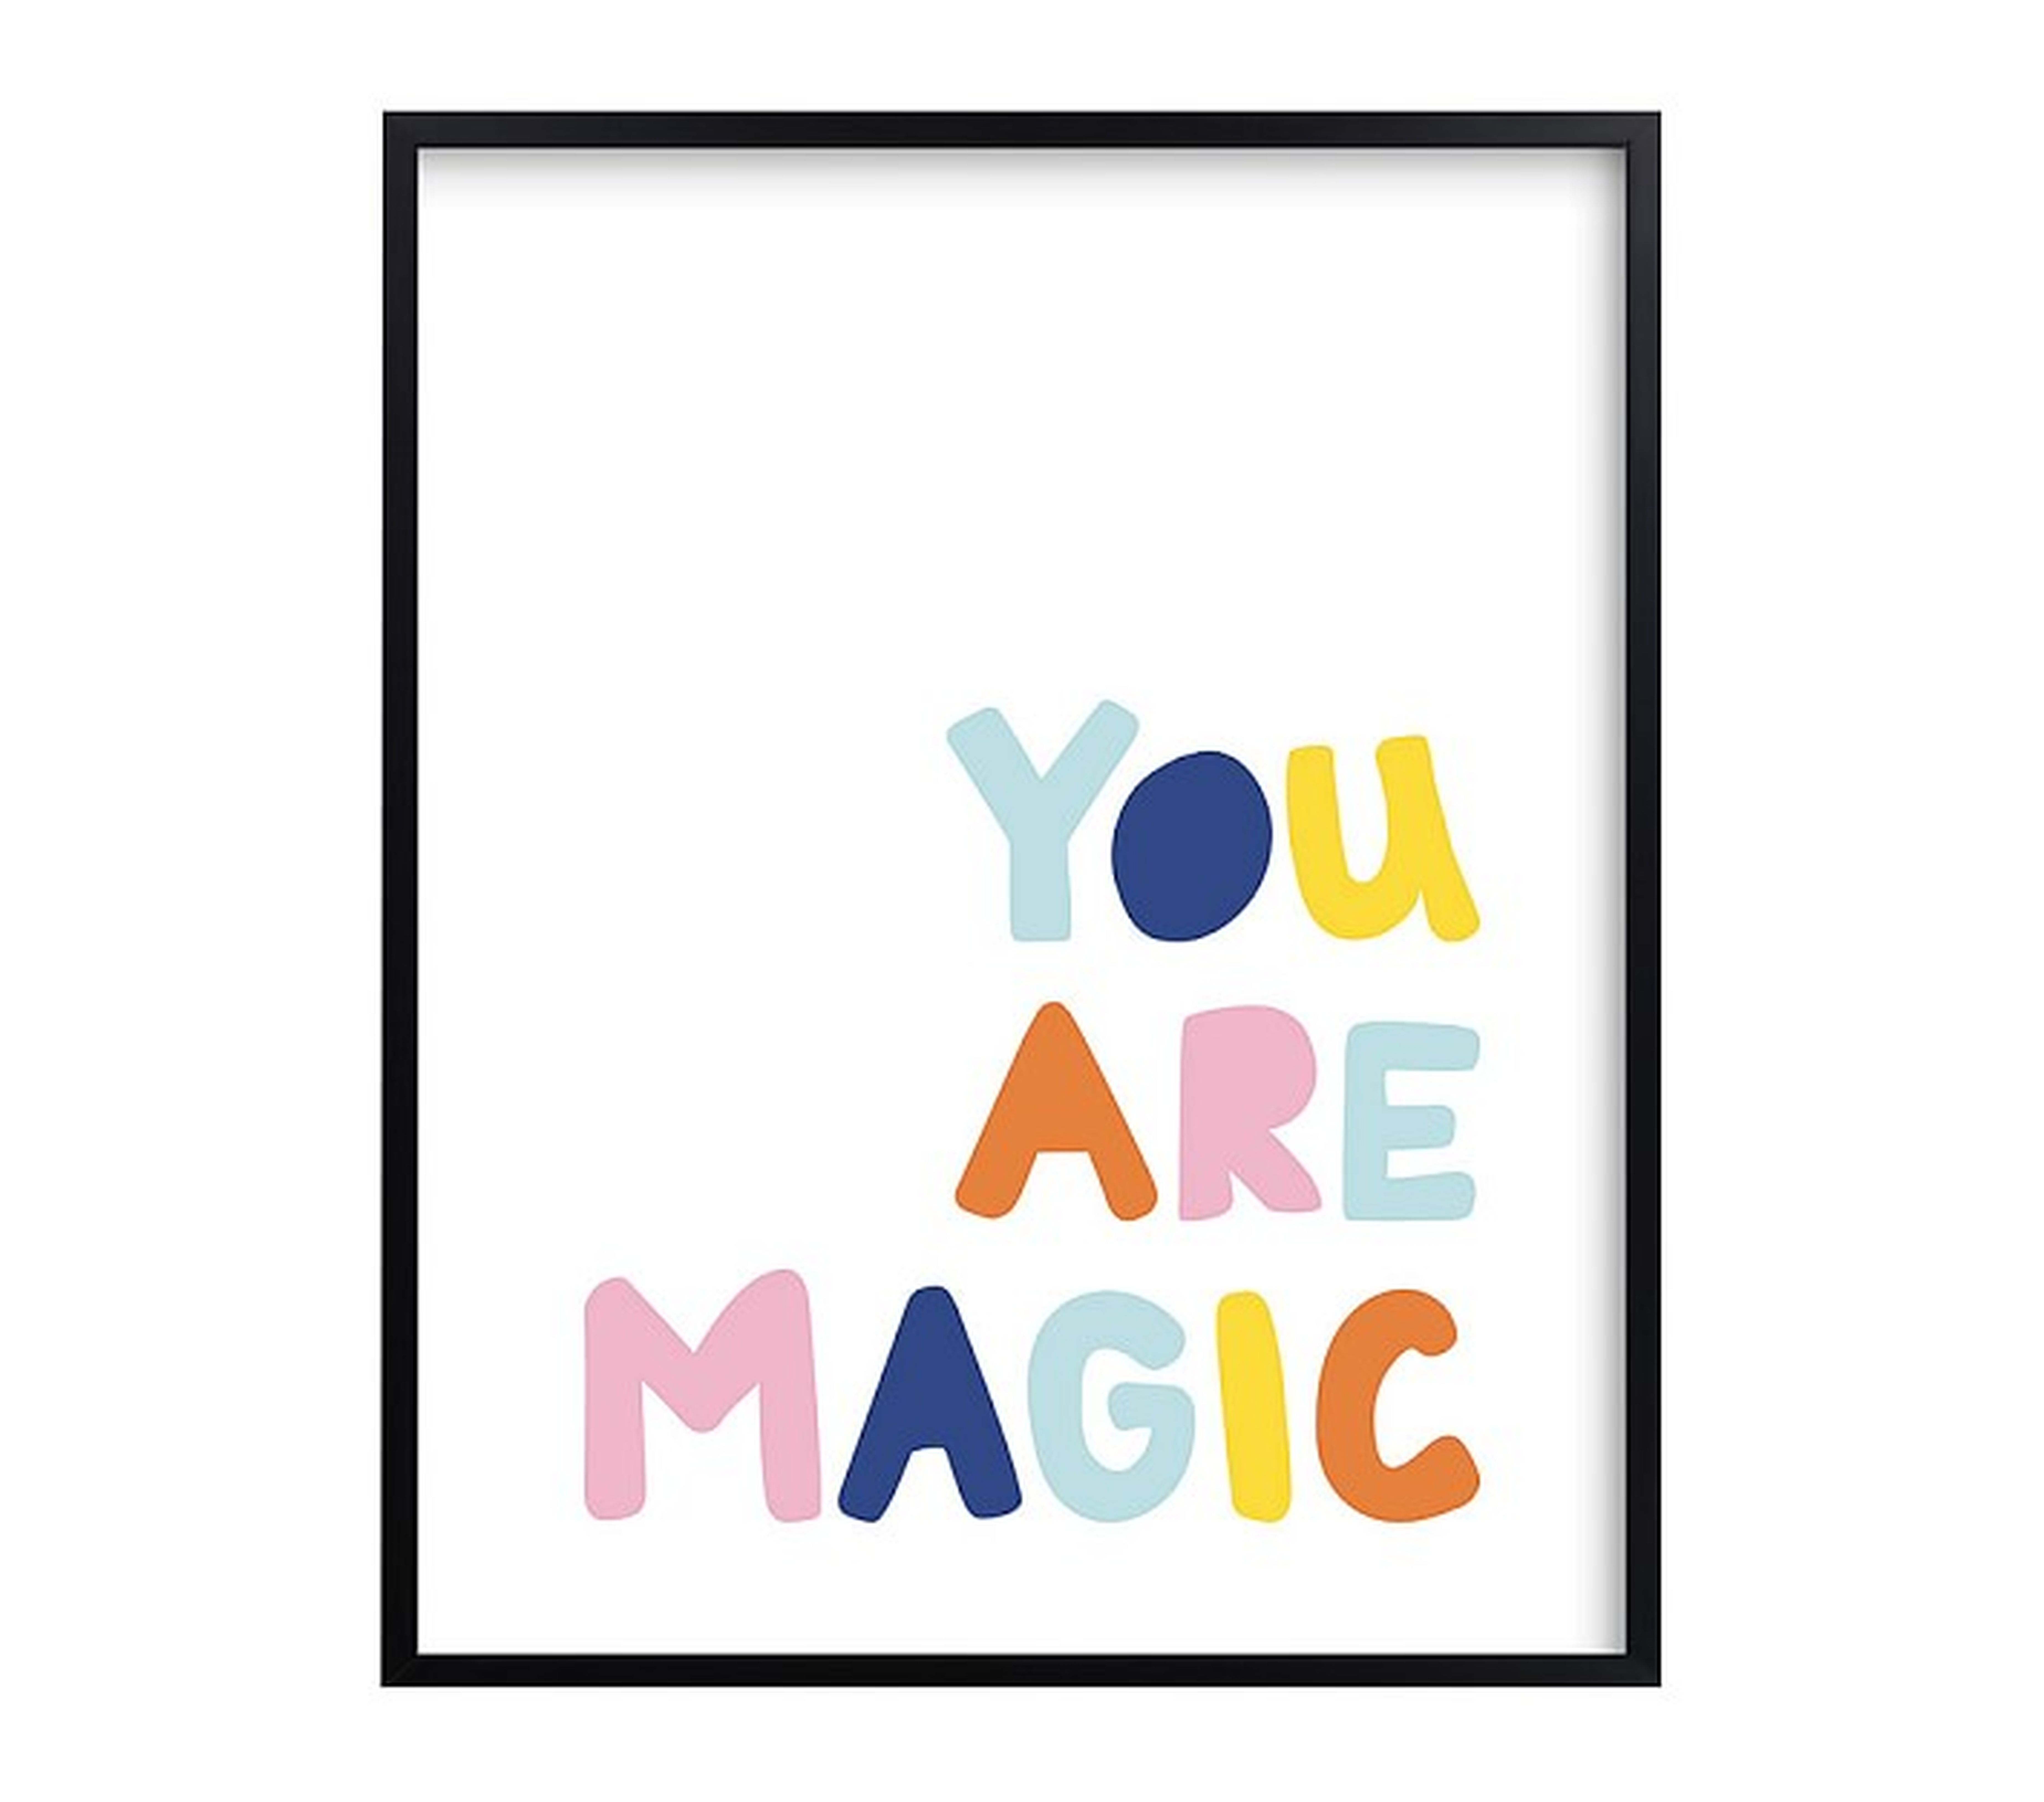 west elm x pbk You Are Magic Wall Art by Minted(R), 16x20 - Pottery Barn Kids